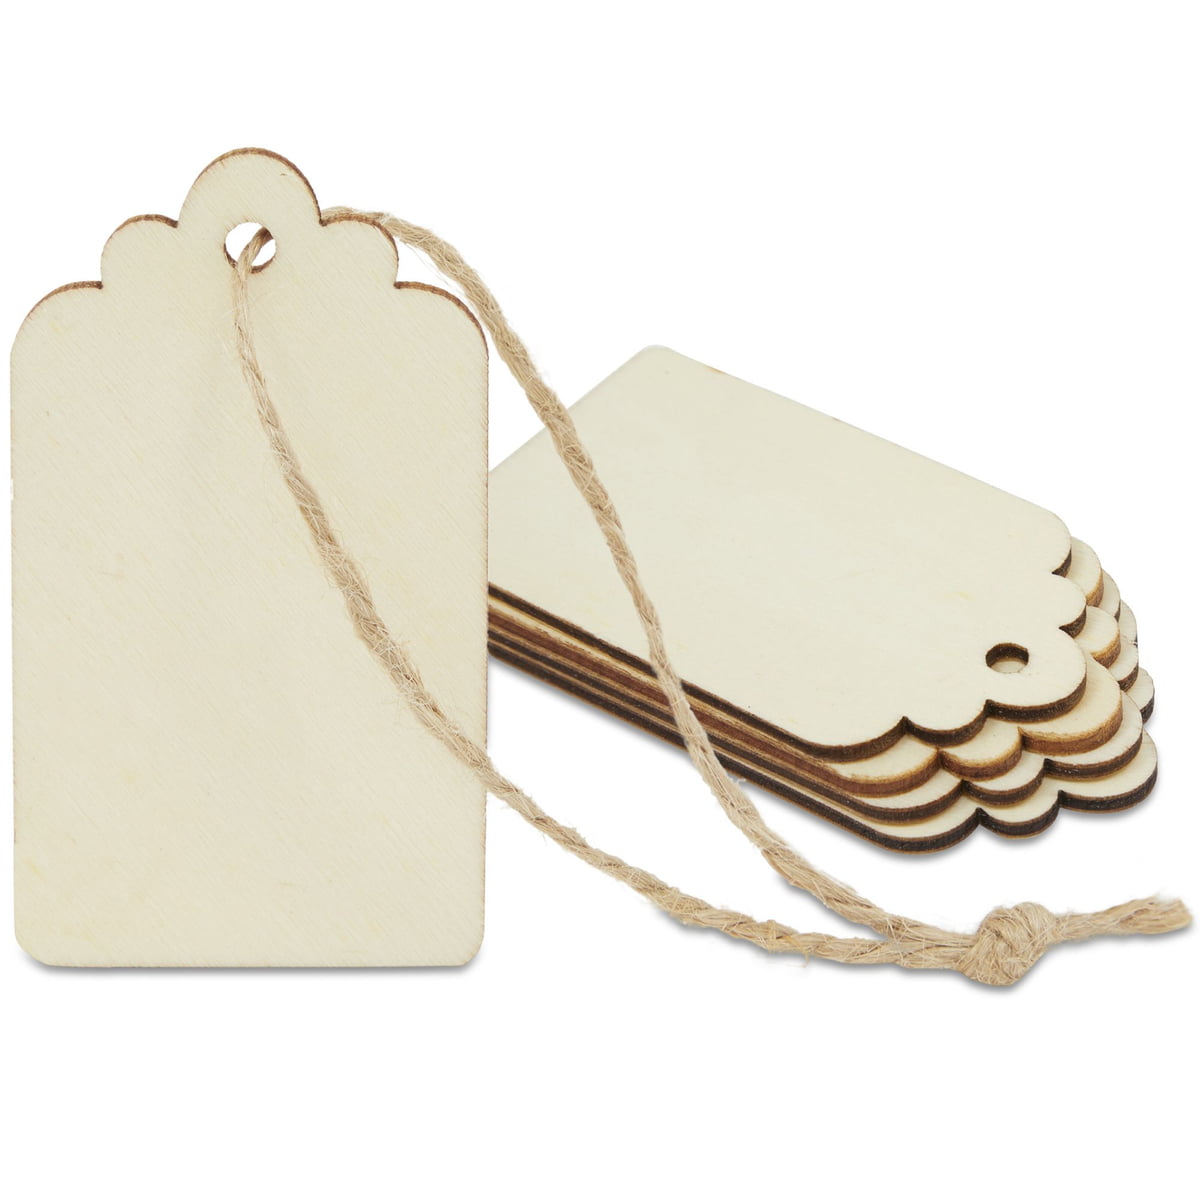 Wooden Christmas Gift Tags Novelty Wedding Favour Luggage Tag Xmas MDF Craft 